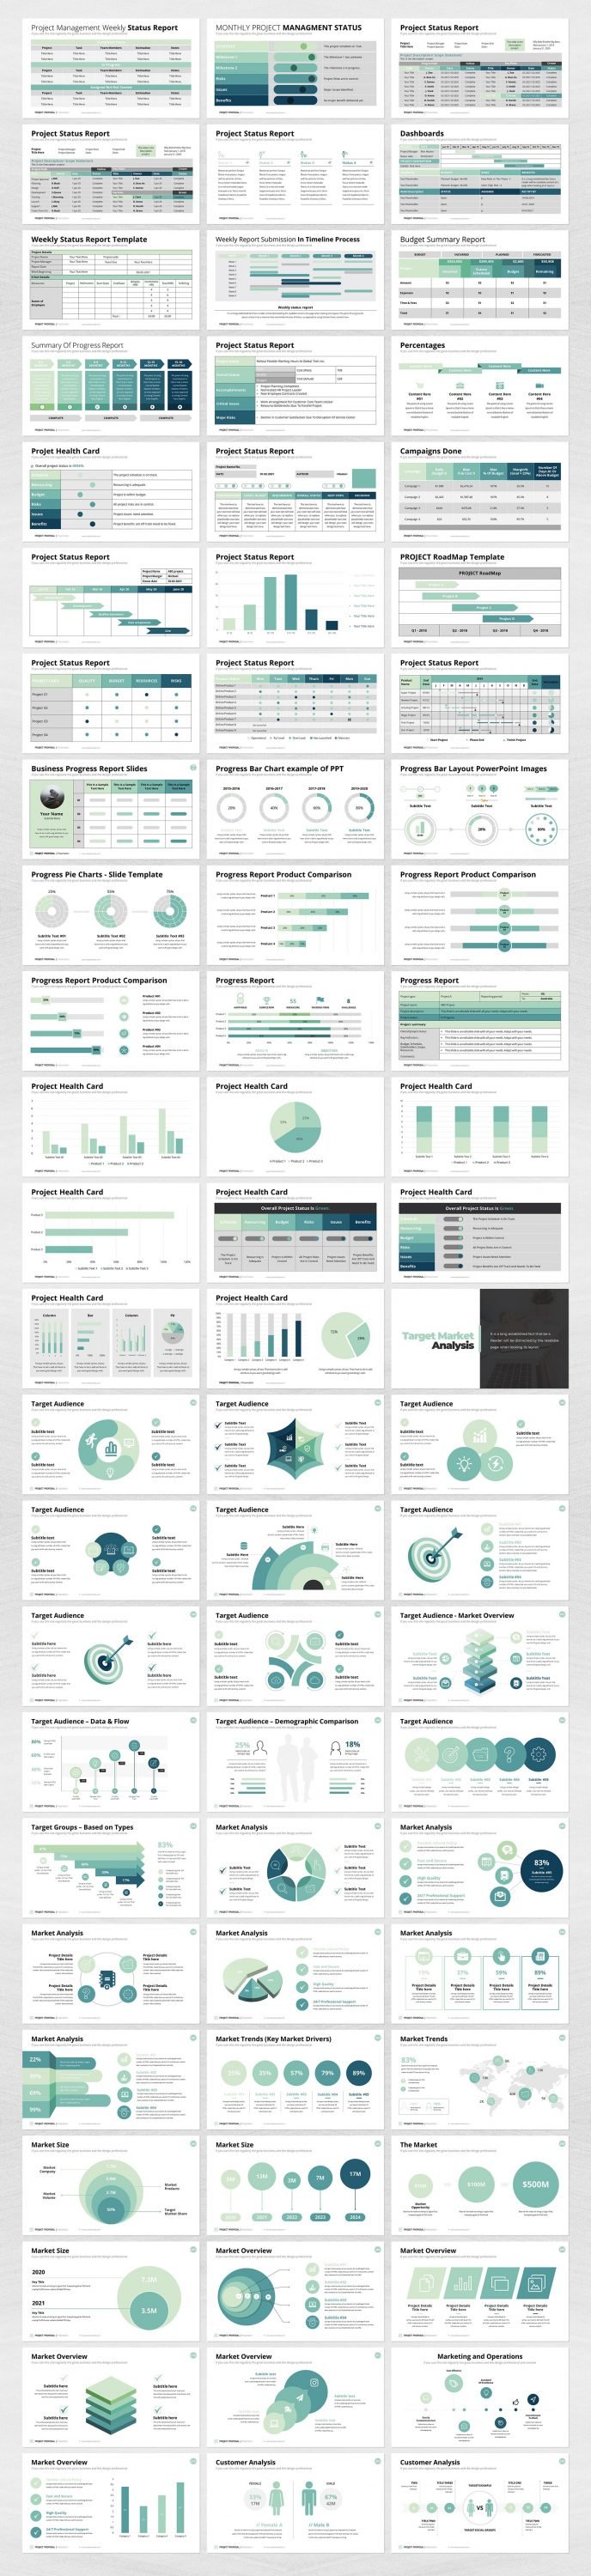 This template is suitable for business reports as it accommodates tables and various comparison charts.